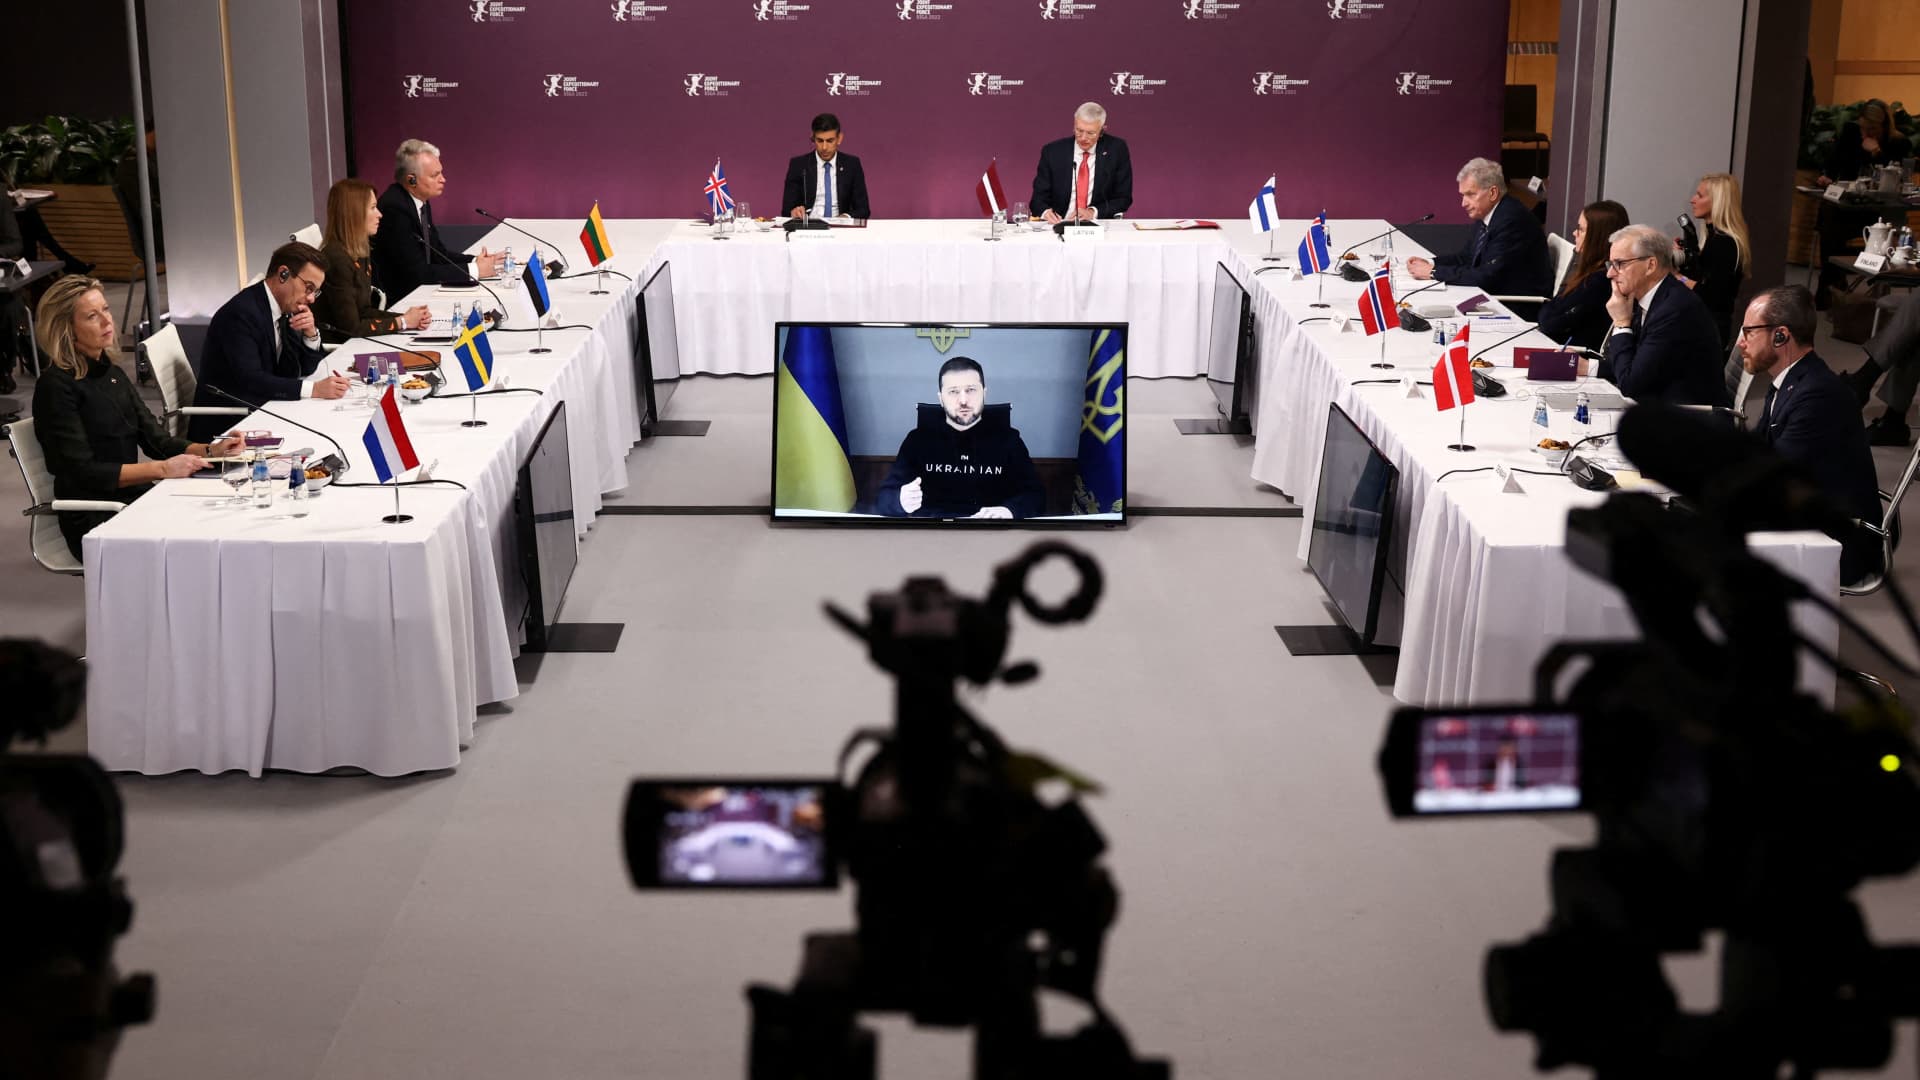 Ukrainian President Volodymyr Zelensky is displayed on a screen as he speaks via video link during a Joint Expeditionary Force (JEF) plenary session in Riga, Latvia December 19, 2022.